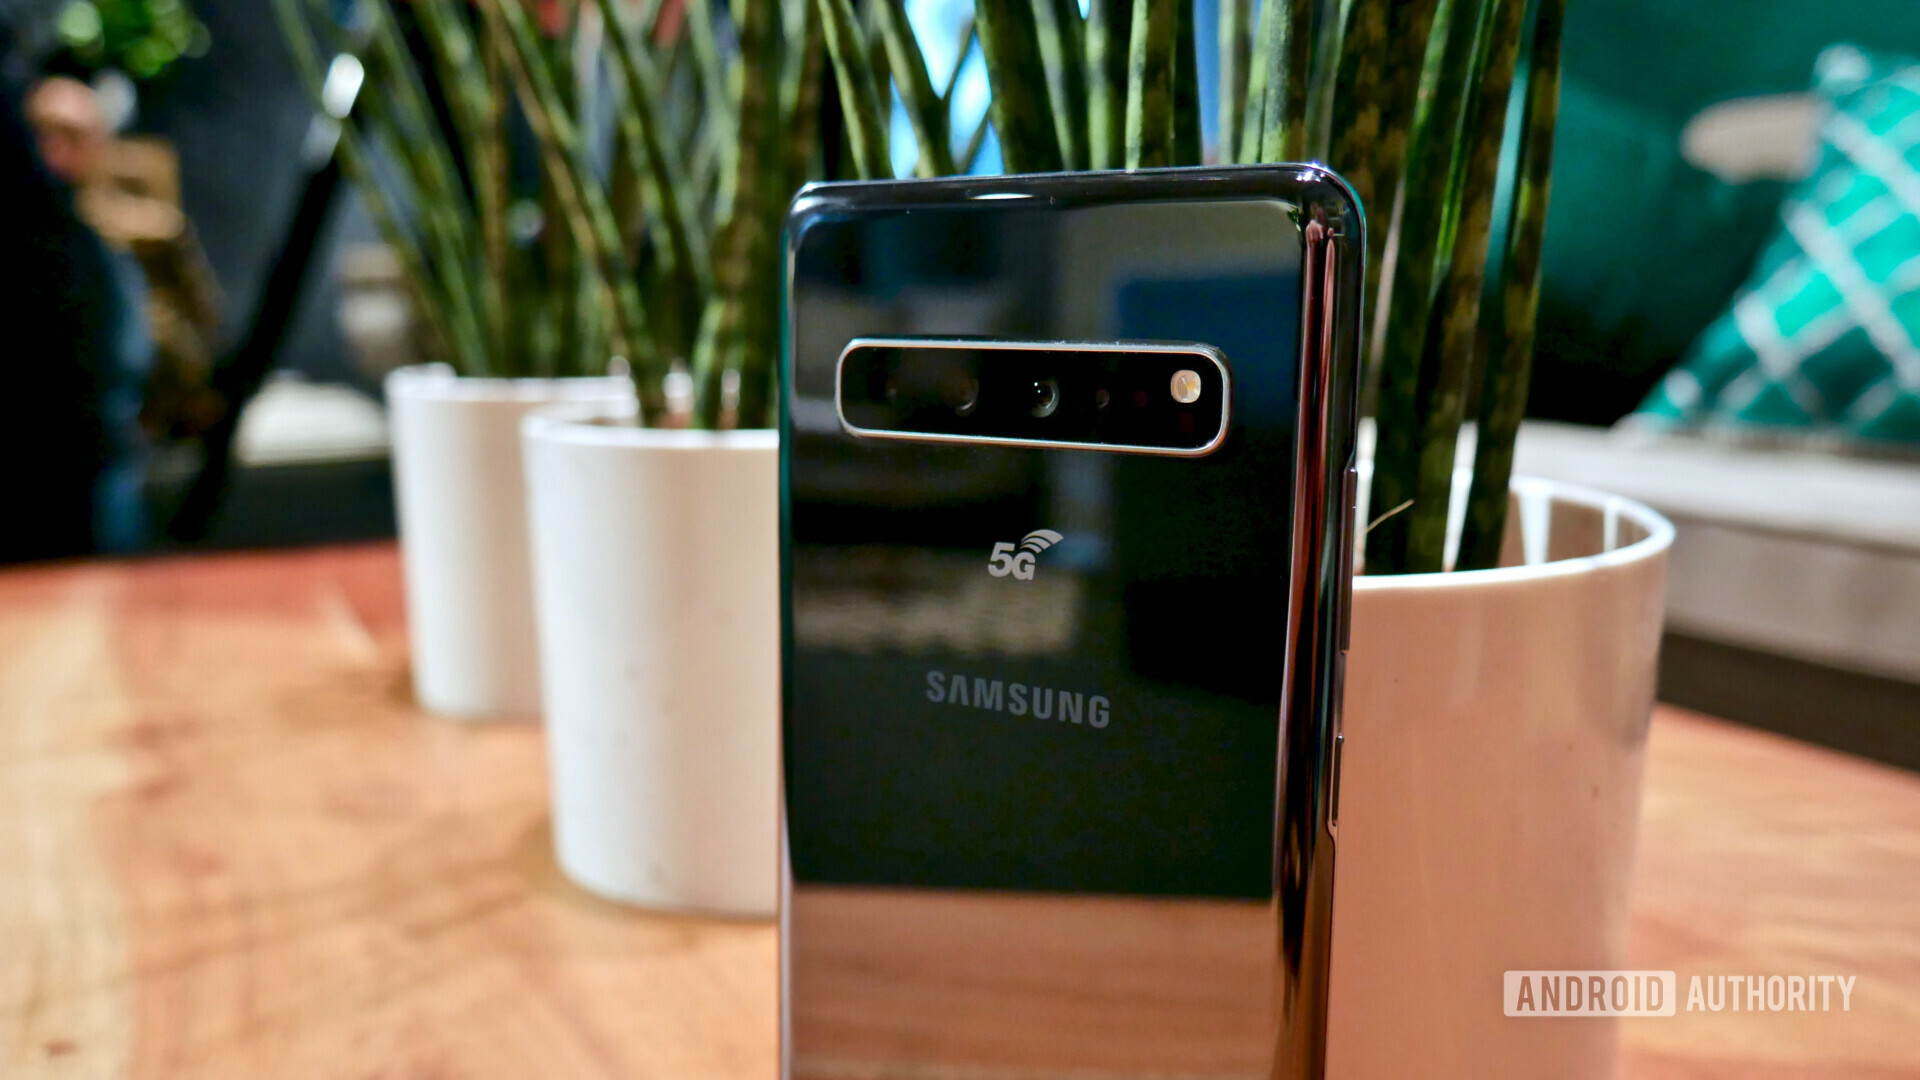 Mail it can Intimate Samsung Galaxy S10 5G: Much more than just 5G